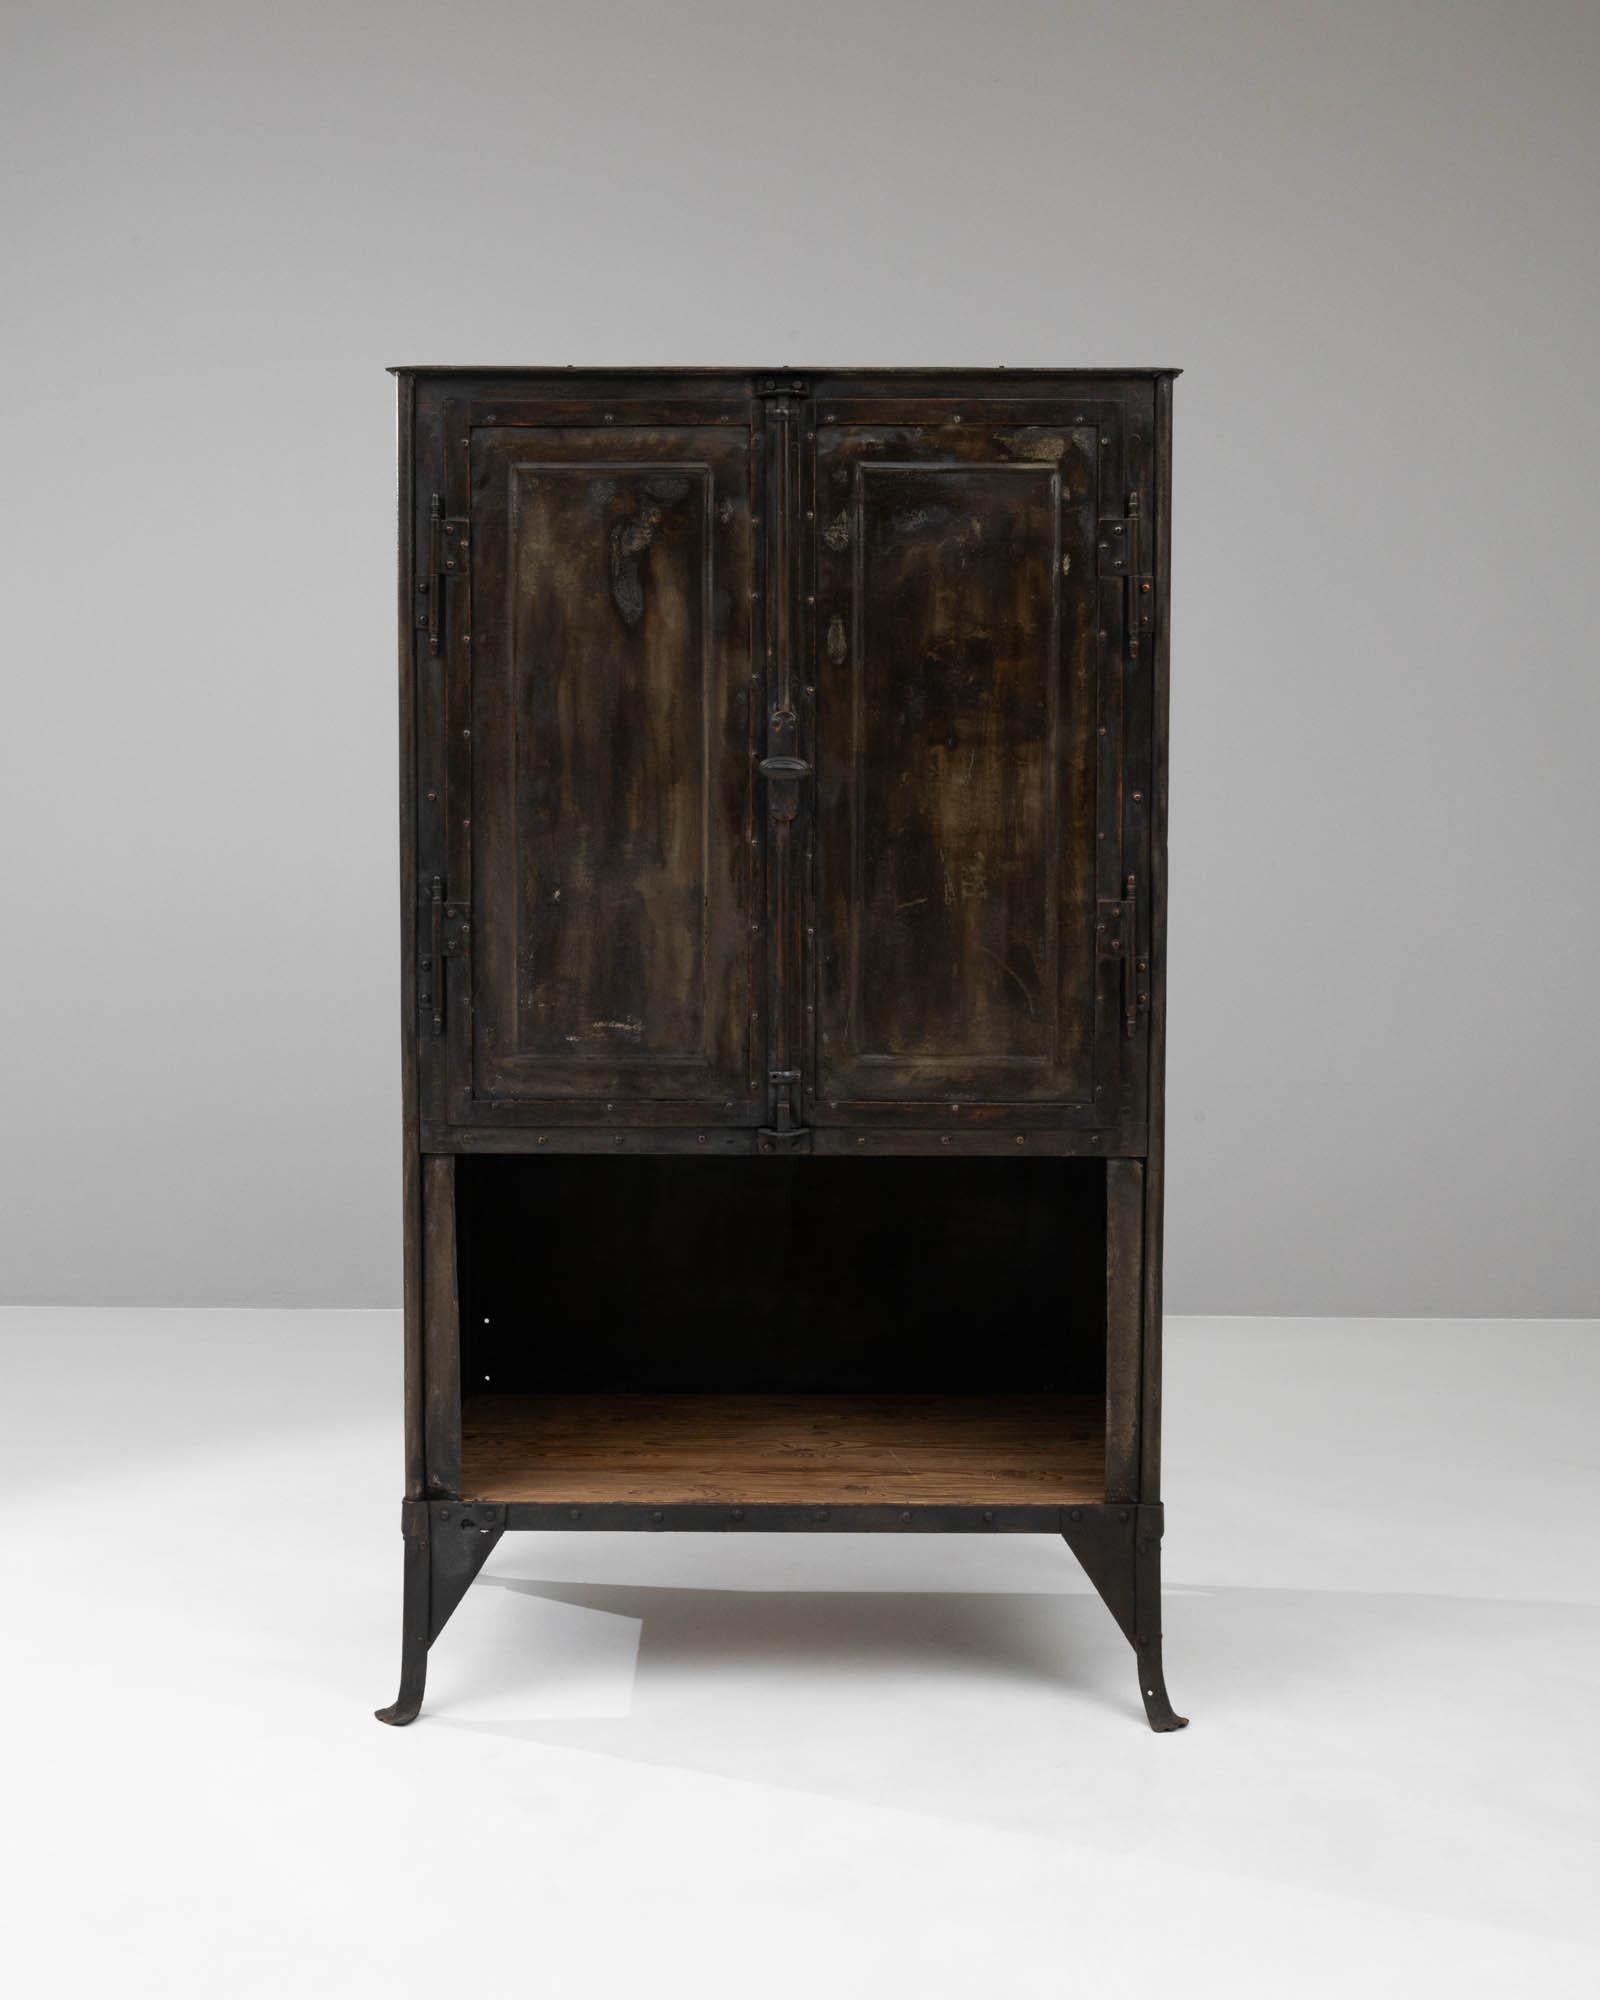 Discover the rugged charm and practicality of this early 1900s French metal cabinet, a truly distinctive piece that adds both character and utility to your space. Crafted with sturdy metal and featuring a contrasting wooden shelf, this cabinet